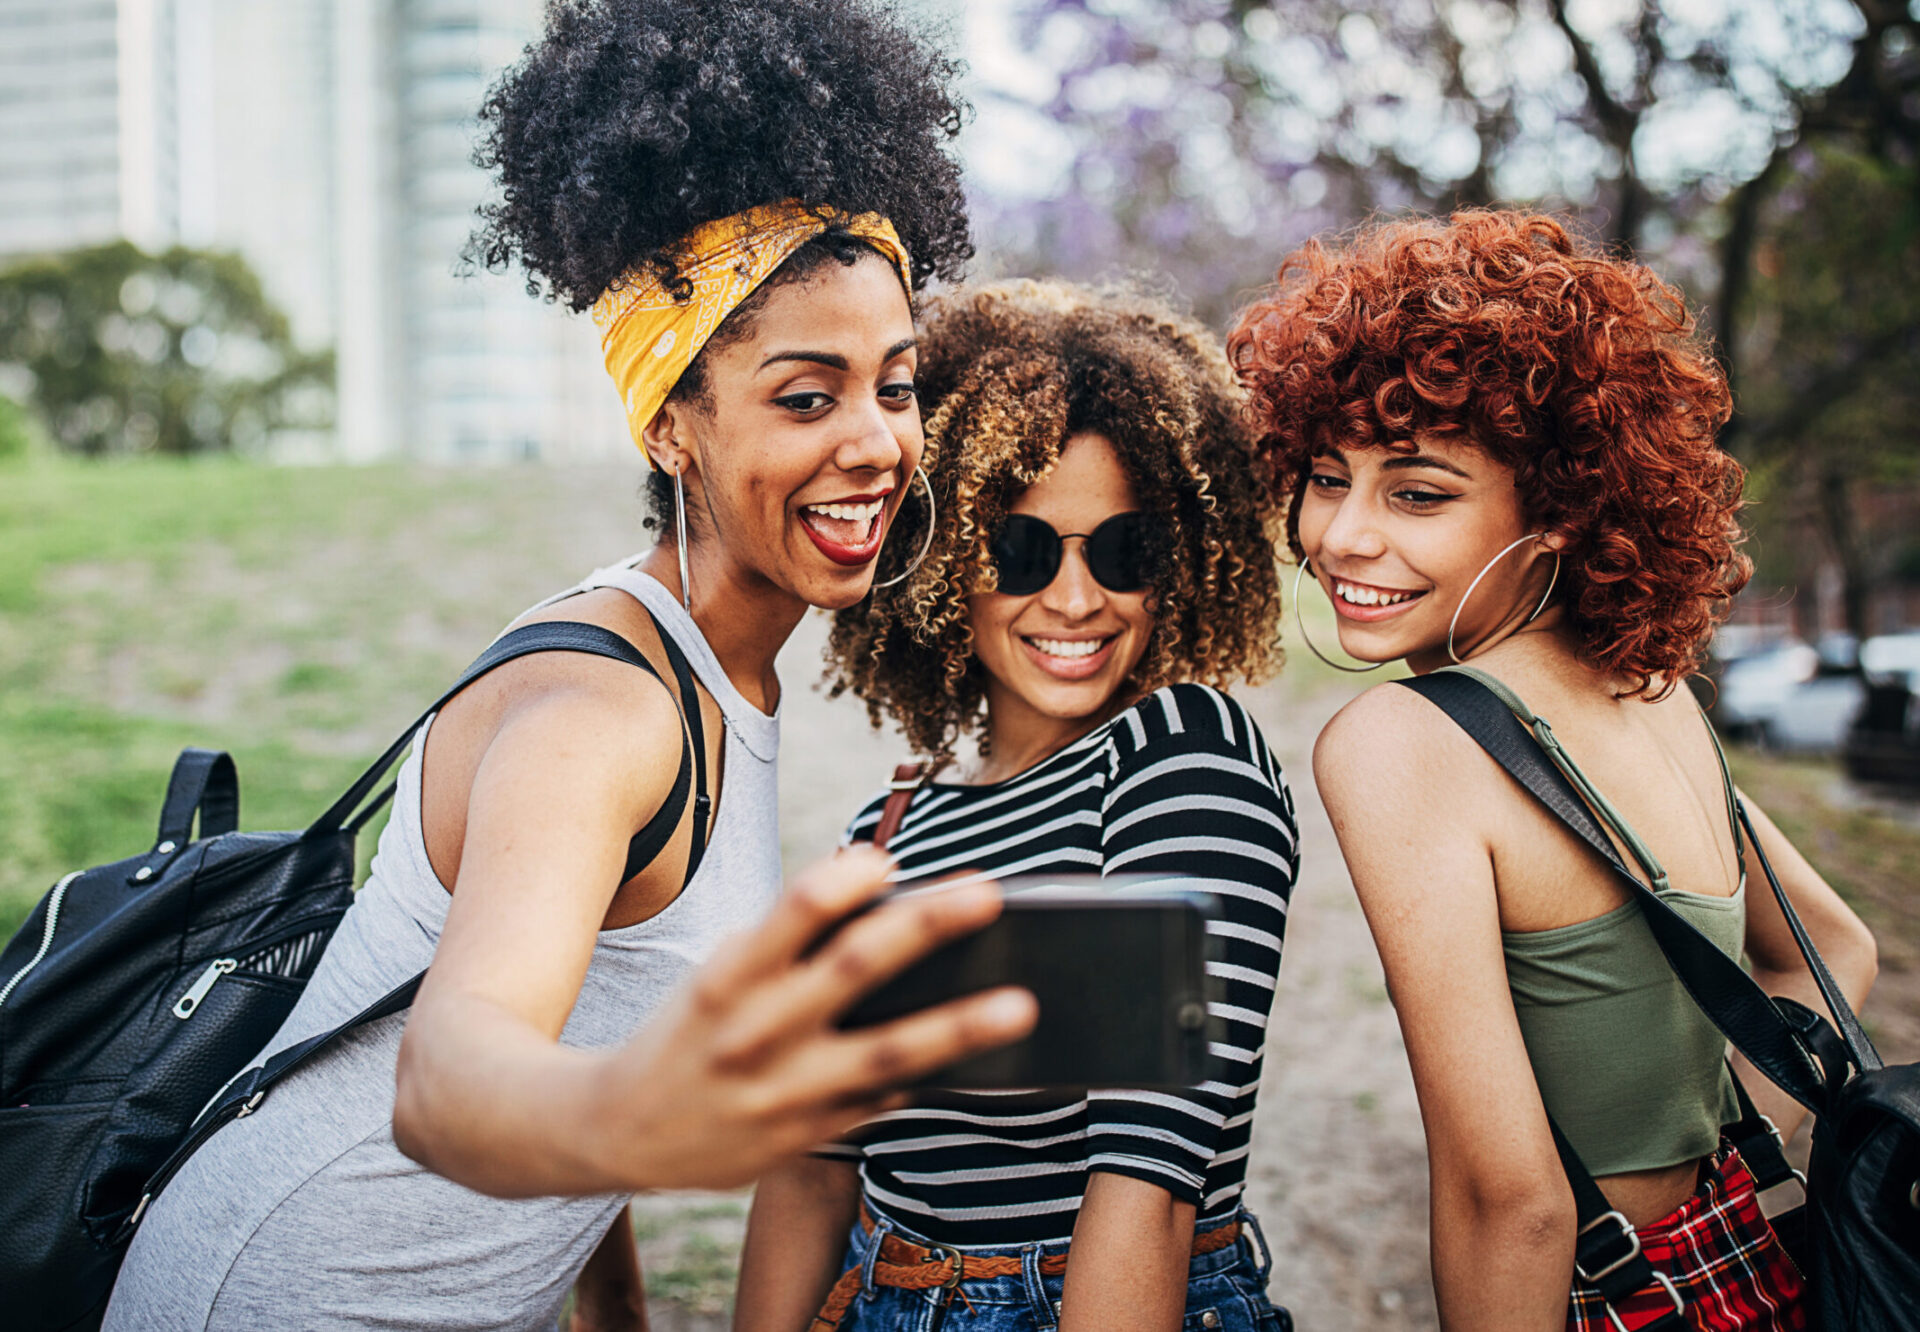 Three happy young women, smiling and taking a selfie outside.